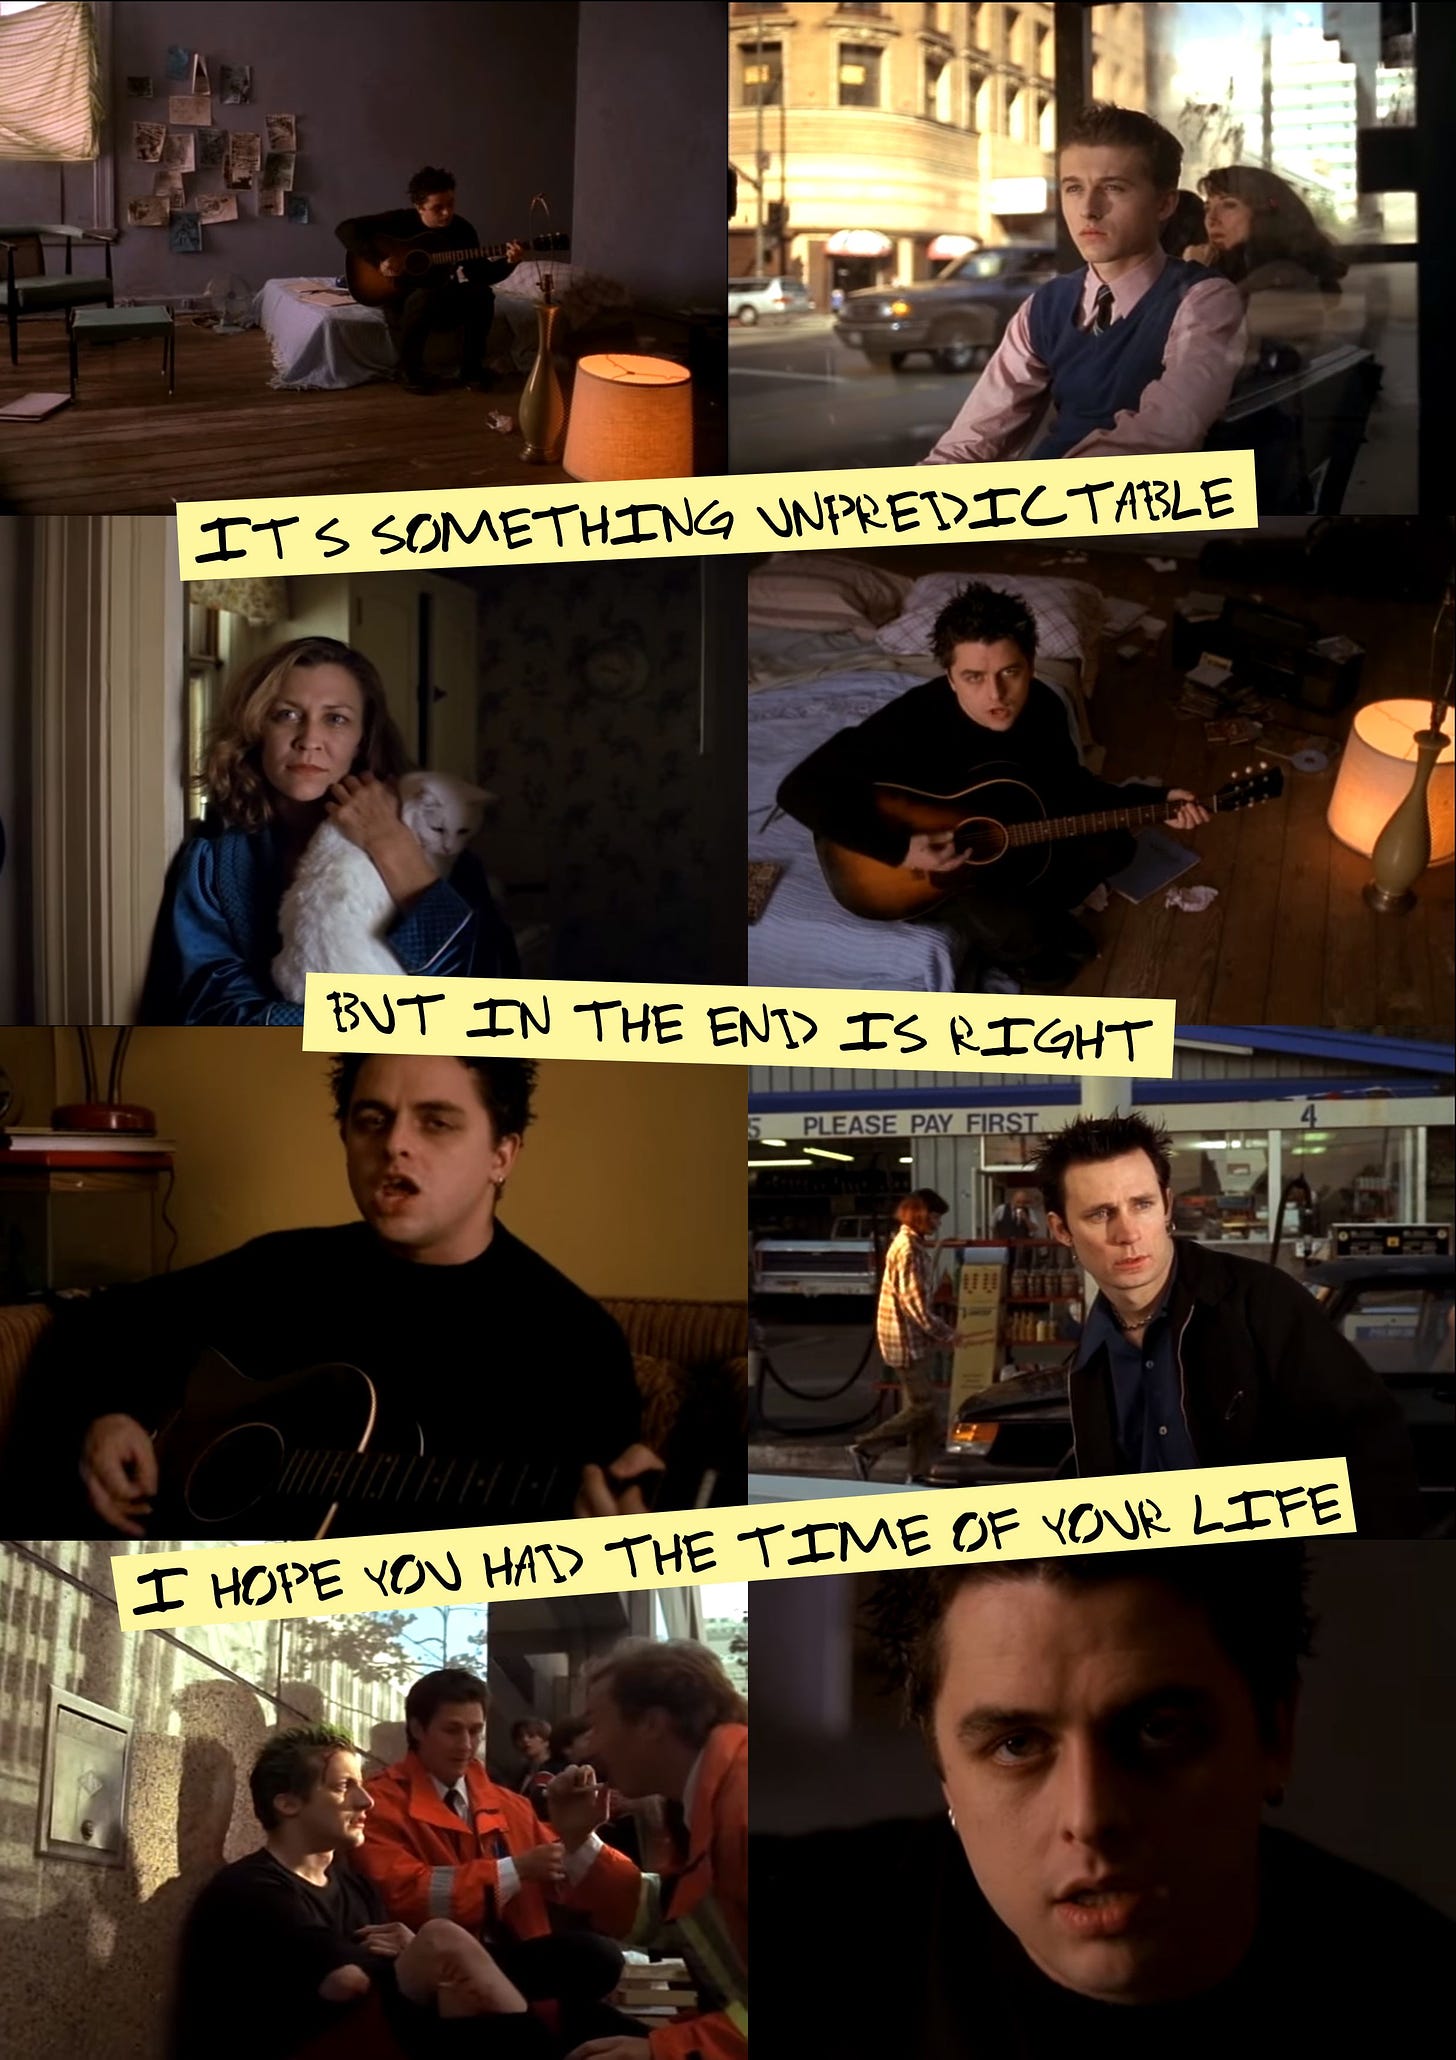 Meme of stills from Good Riddance (Time of Your Life) music video by Green Day that reads “It’s something unpredictable but in the end it’s right. I hope you had the time of your life.”